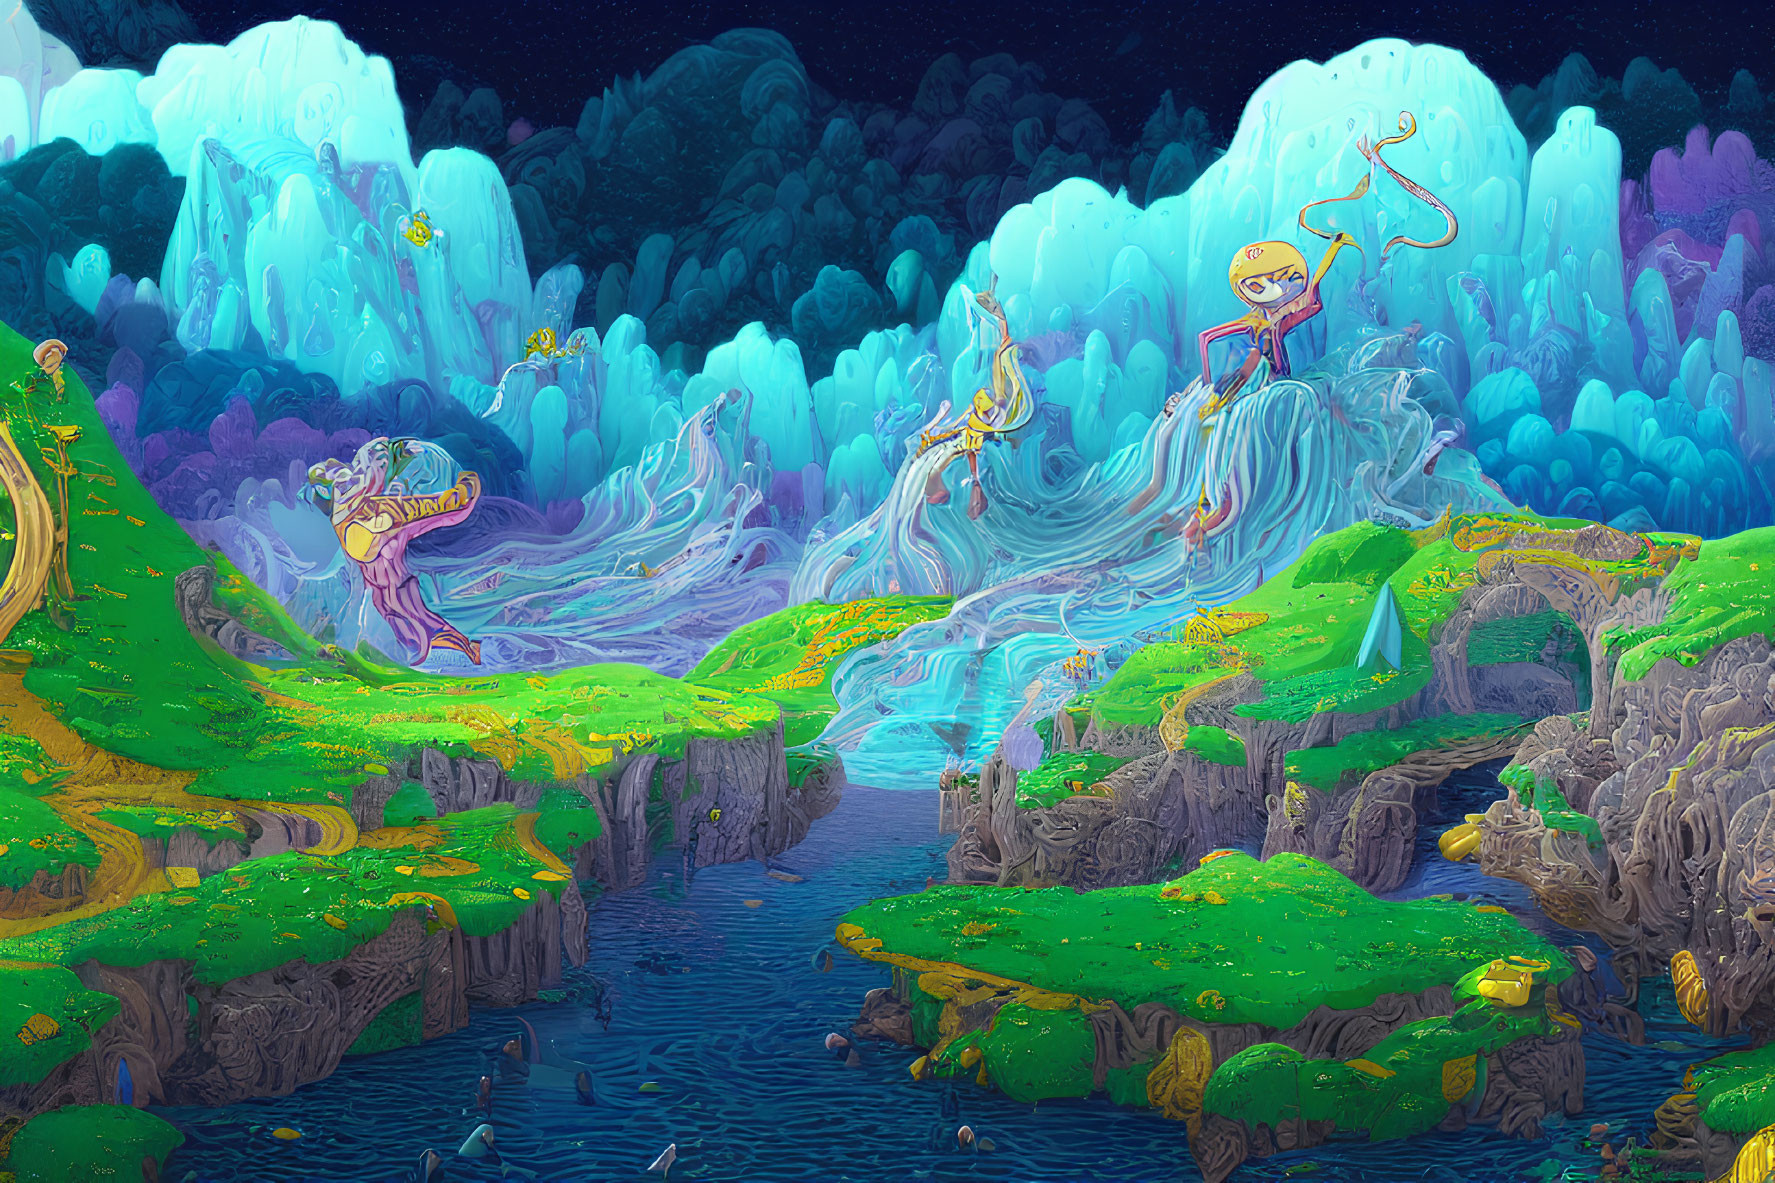 Surreal landscape with blue waterfalls, floating islands, and whimsical characters